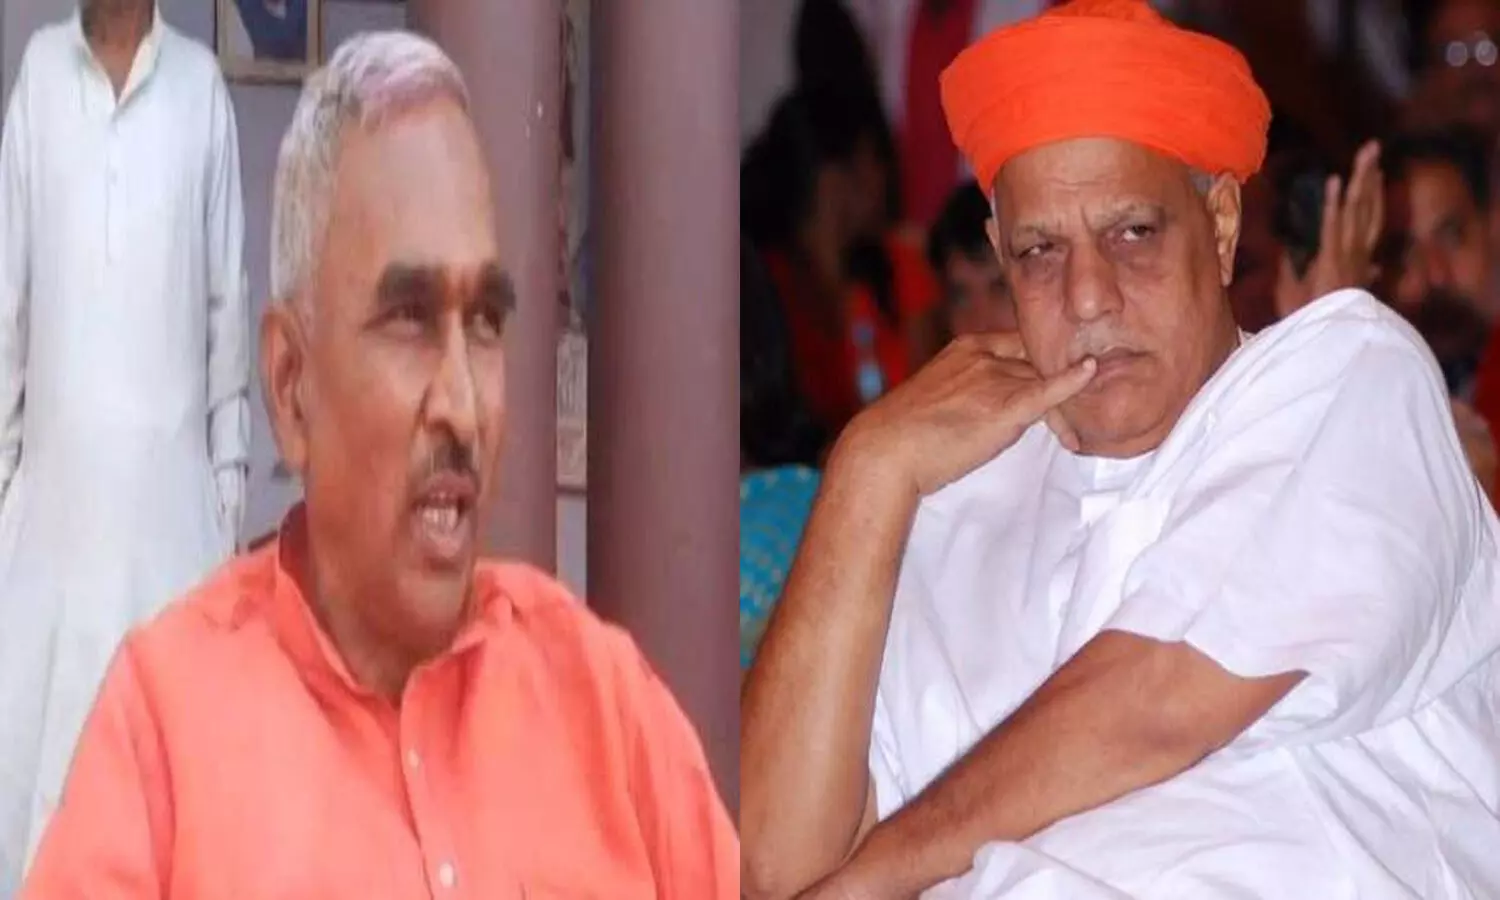 BJP MLA Surendra Singh has made serious allegations against his party MP Virendra Singh Mast